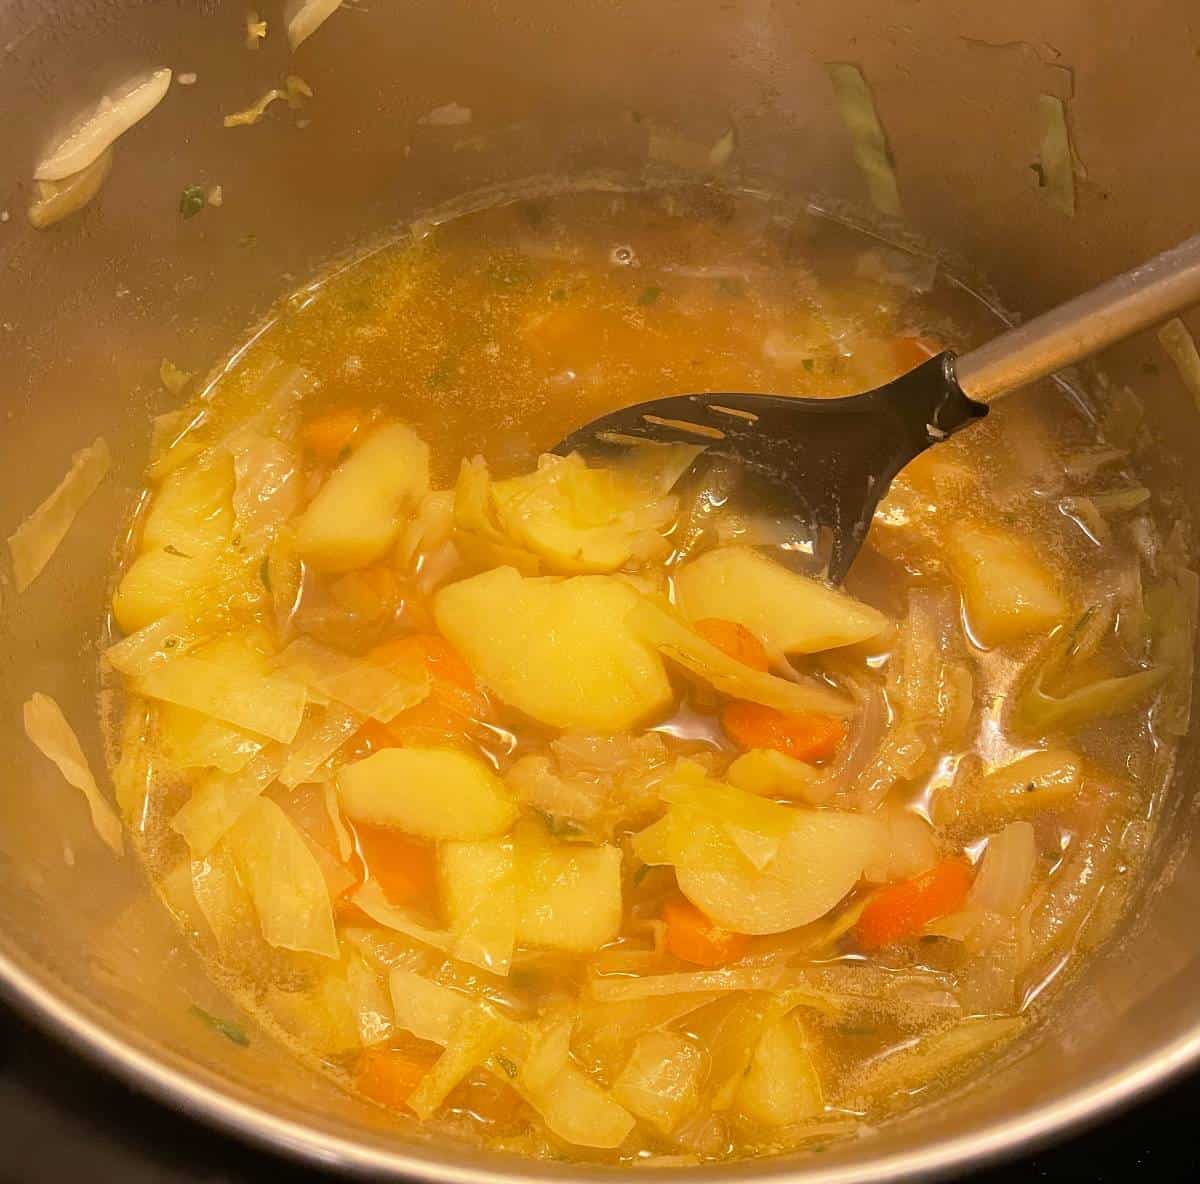 stirring a pot of Irish potato soup with carrots and cabbage.